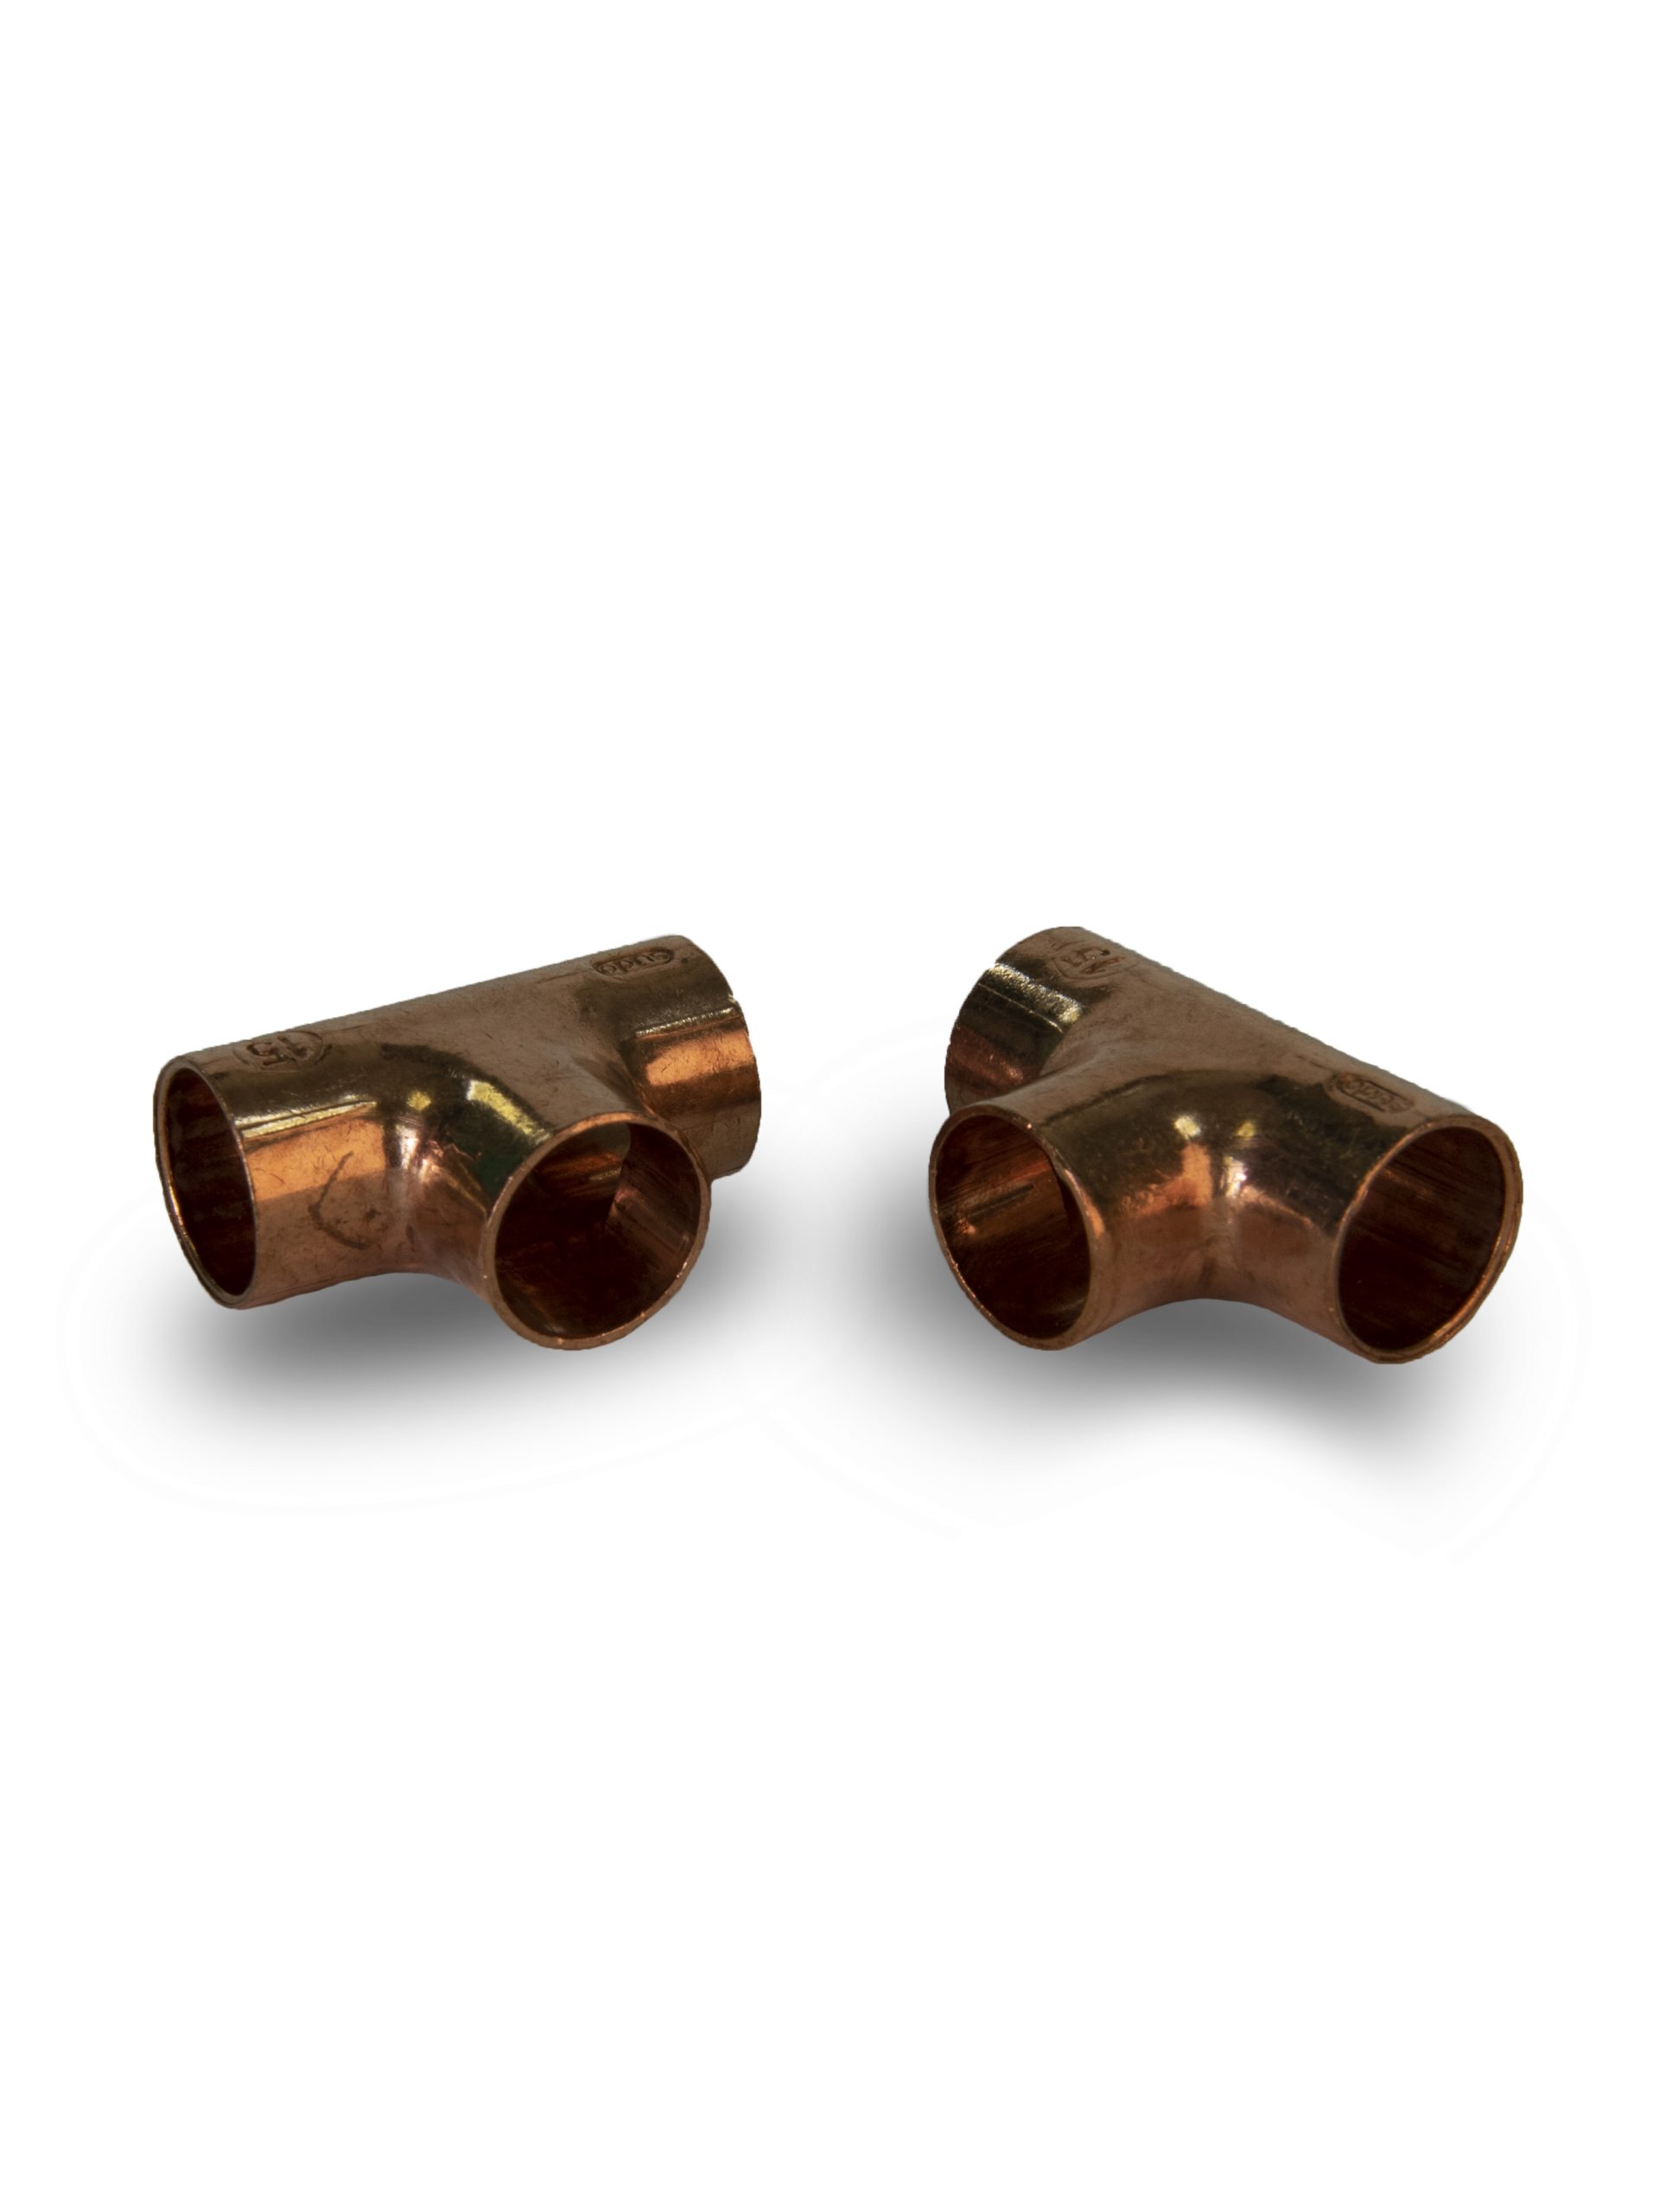 COPPER TEE 12MM, COMAP-CLESSE from Gas Equipment Company Llc Abu Dhabi, UNITED ARAB EMIRATES